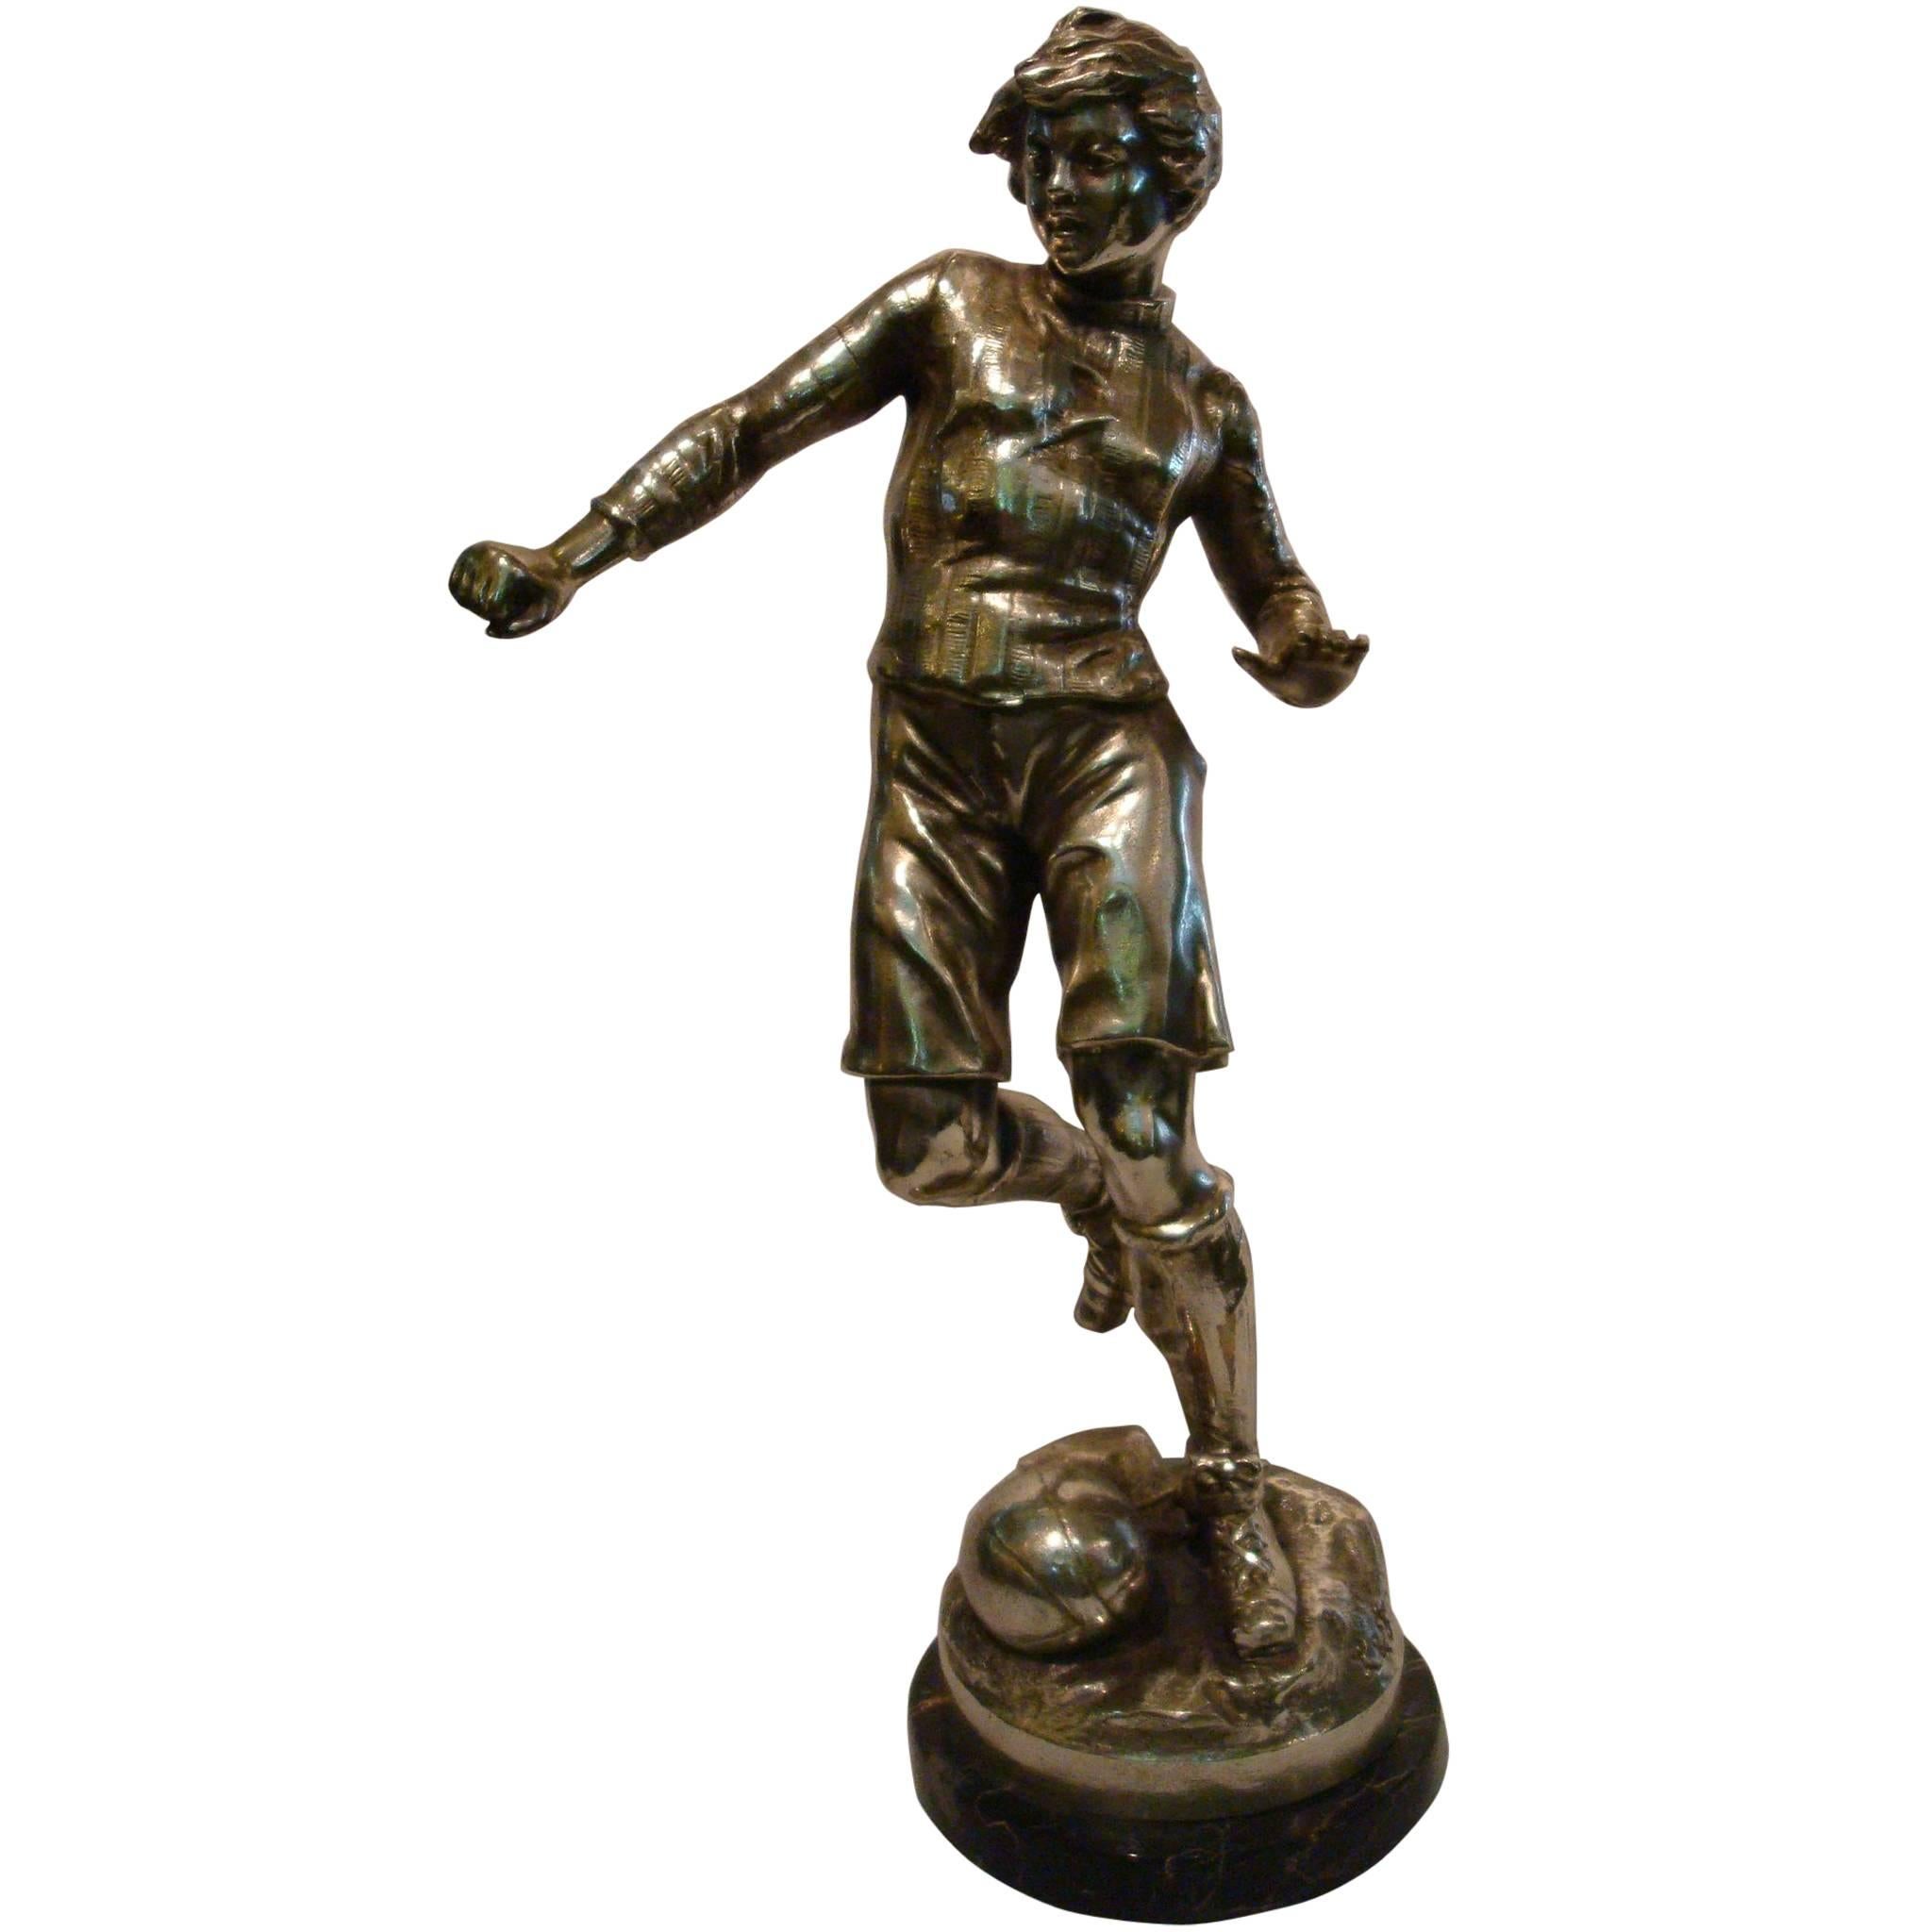 Soccer or Football player Figure, Sculpture or Trophy, France, 1920s